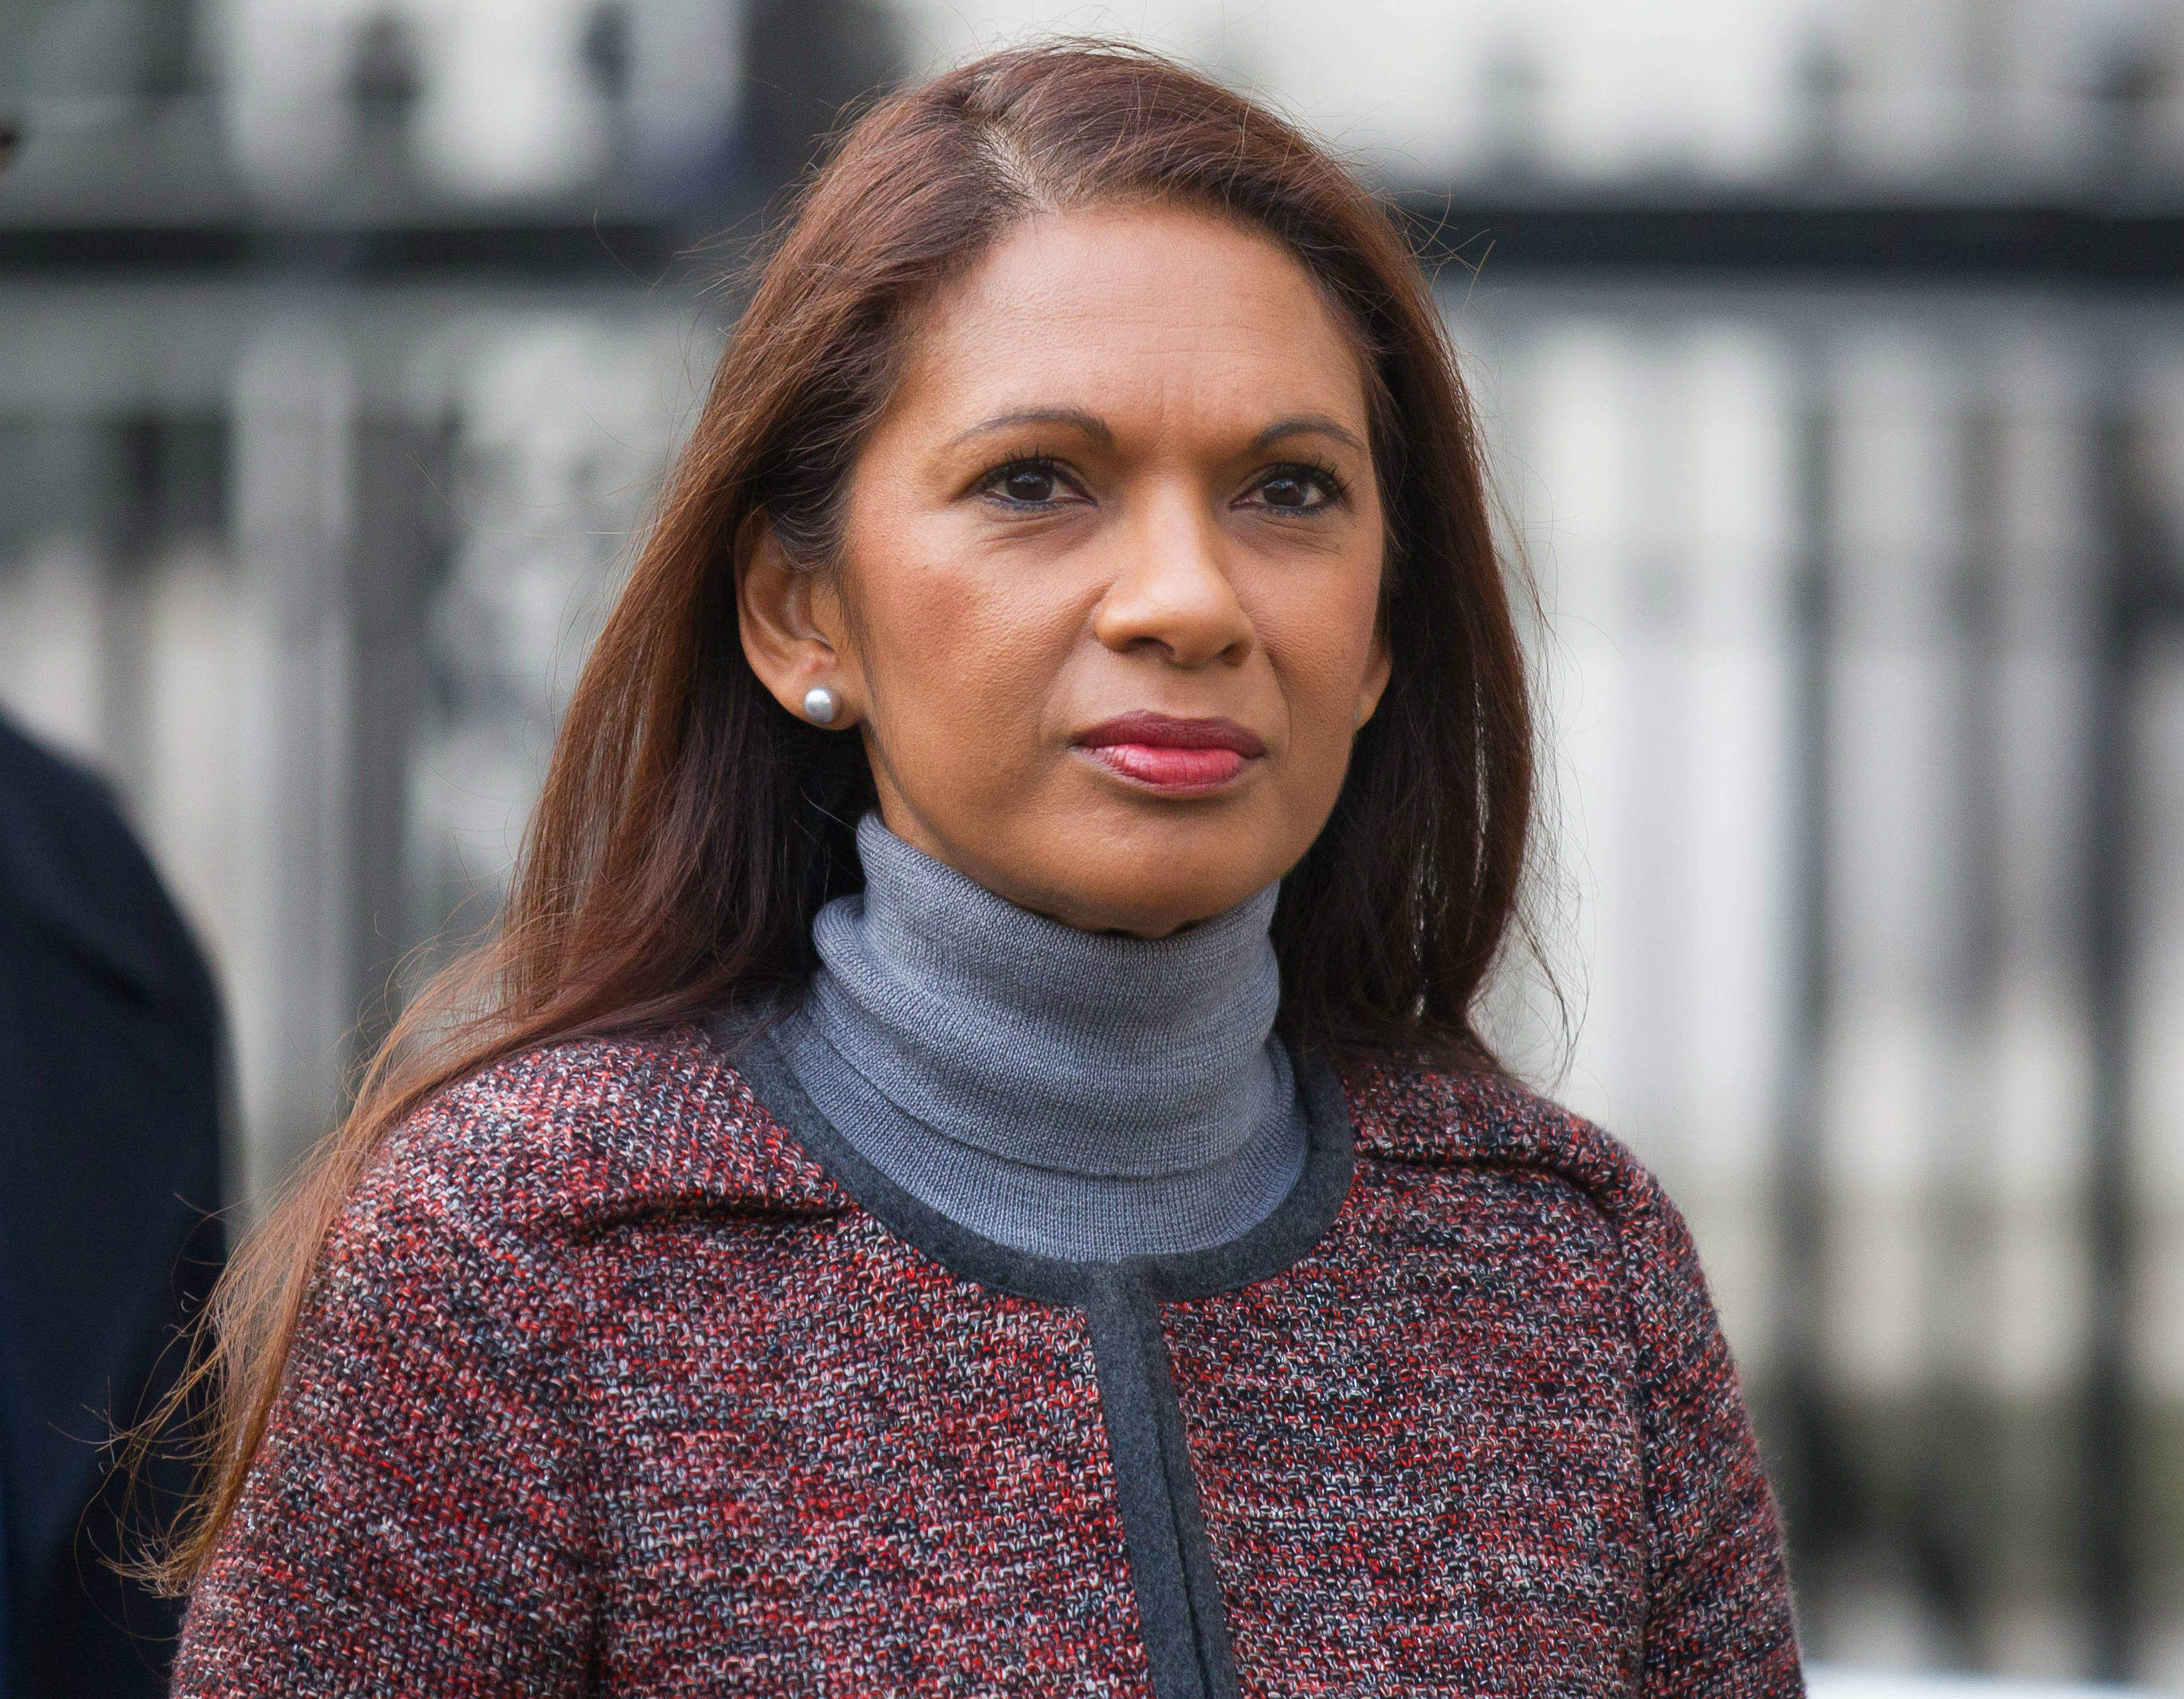 Gina Miller’s challenge to Theresa May: Let me help in the Brexit negotiations